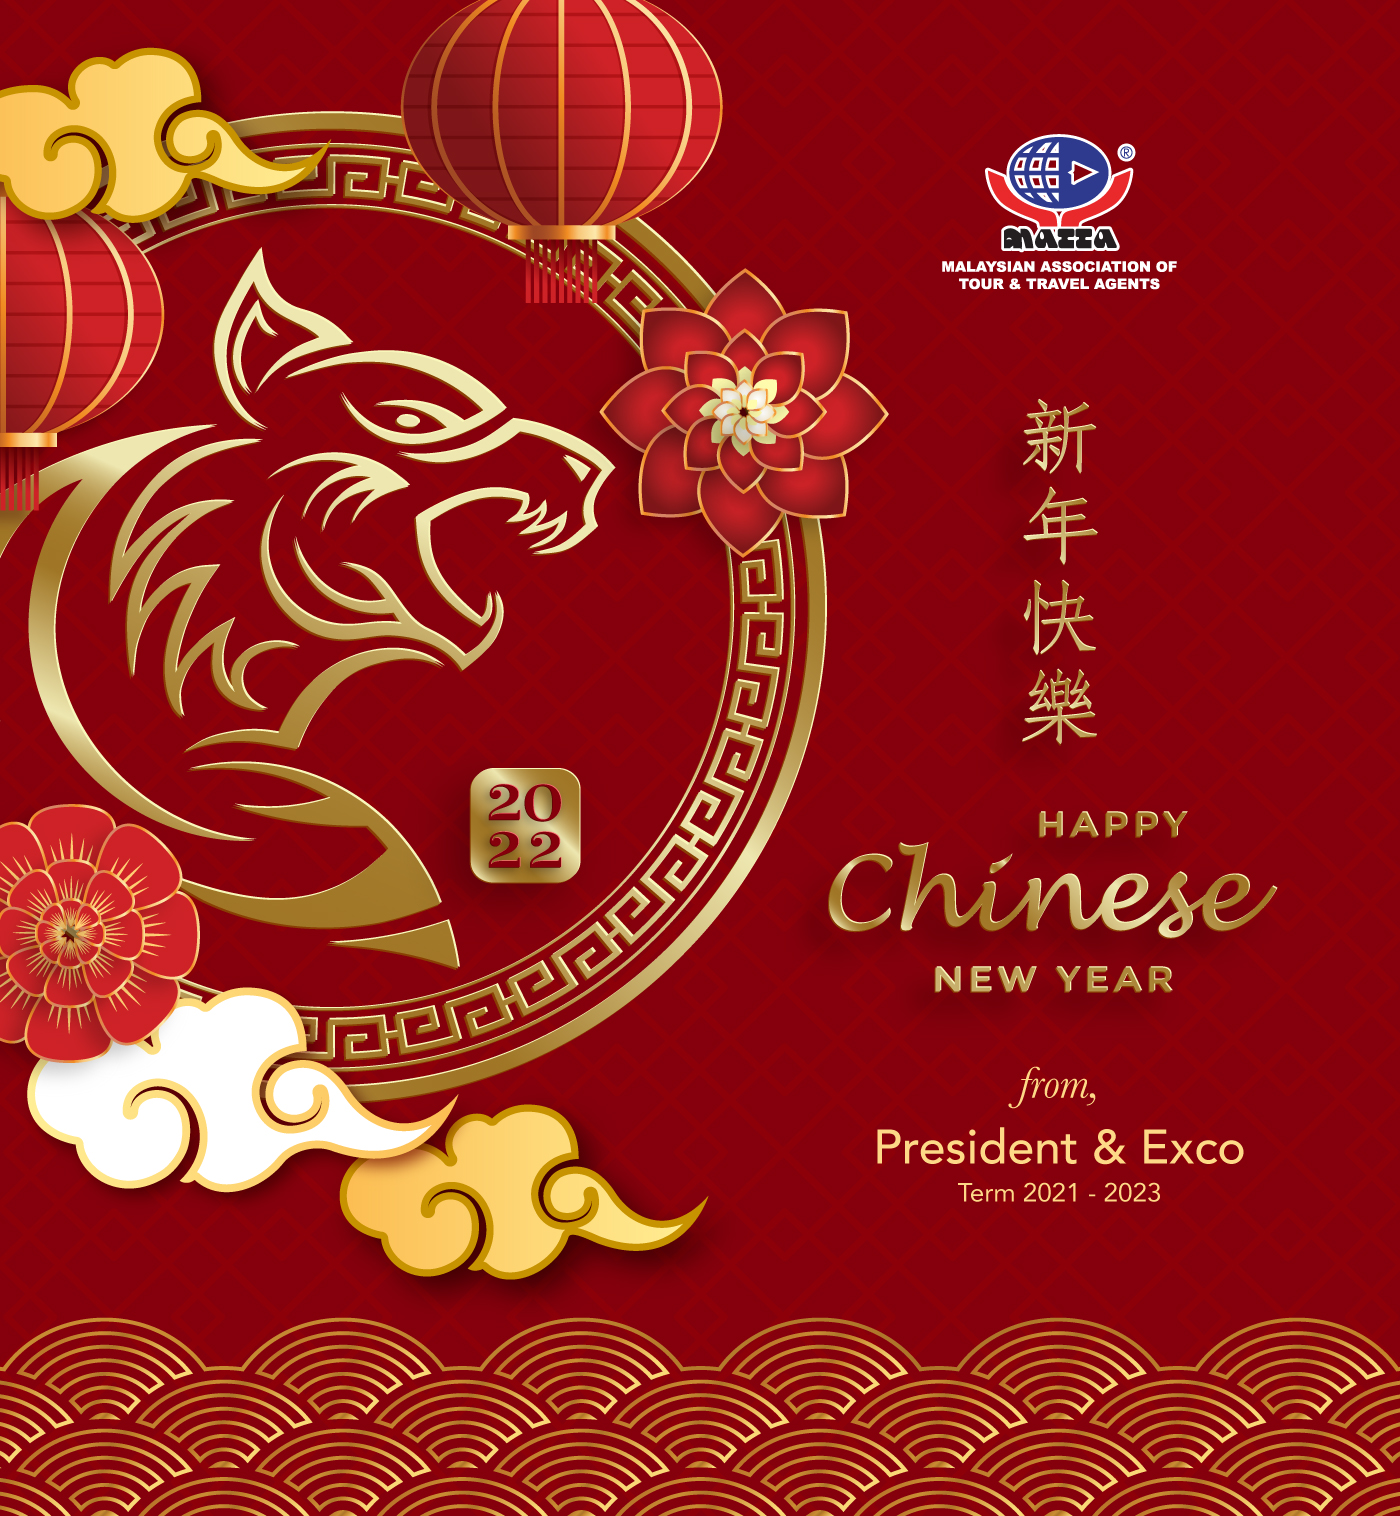 MATTA on Twitter: MATTA would like to wish Happy Chinese New Year 2022 to all members and friends in the travel and tourism industry. May this festival be celebrated with thoughtfulness, happiness,